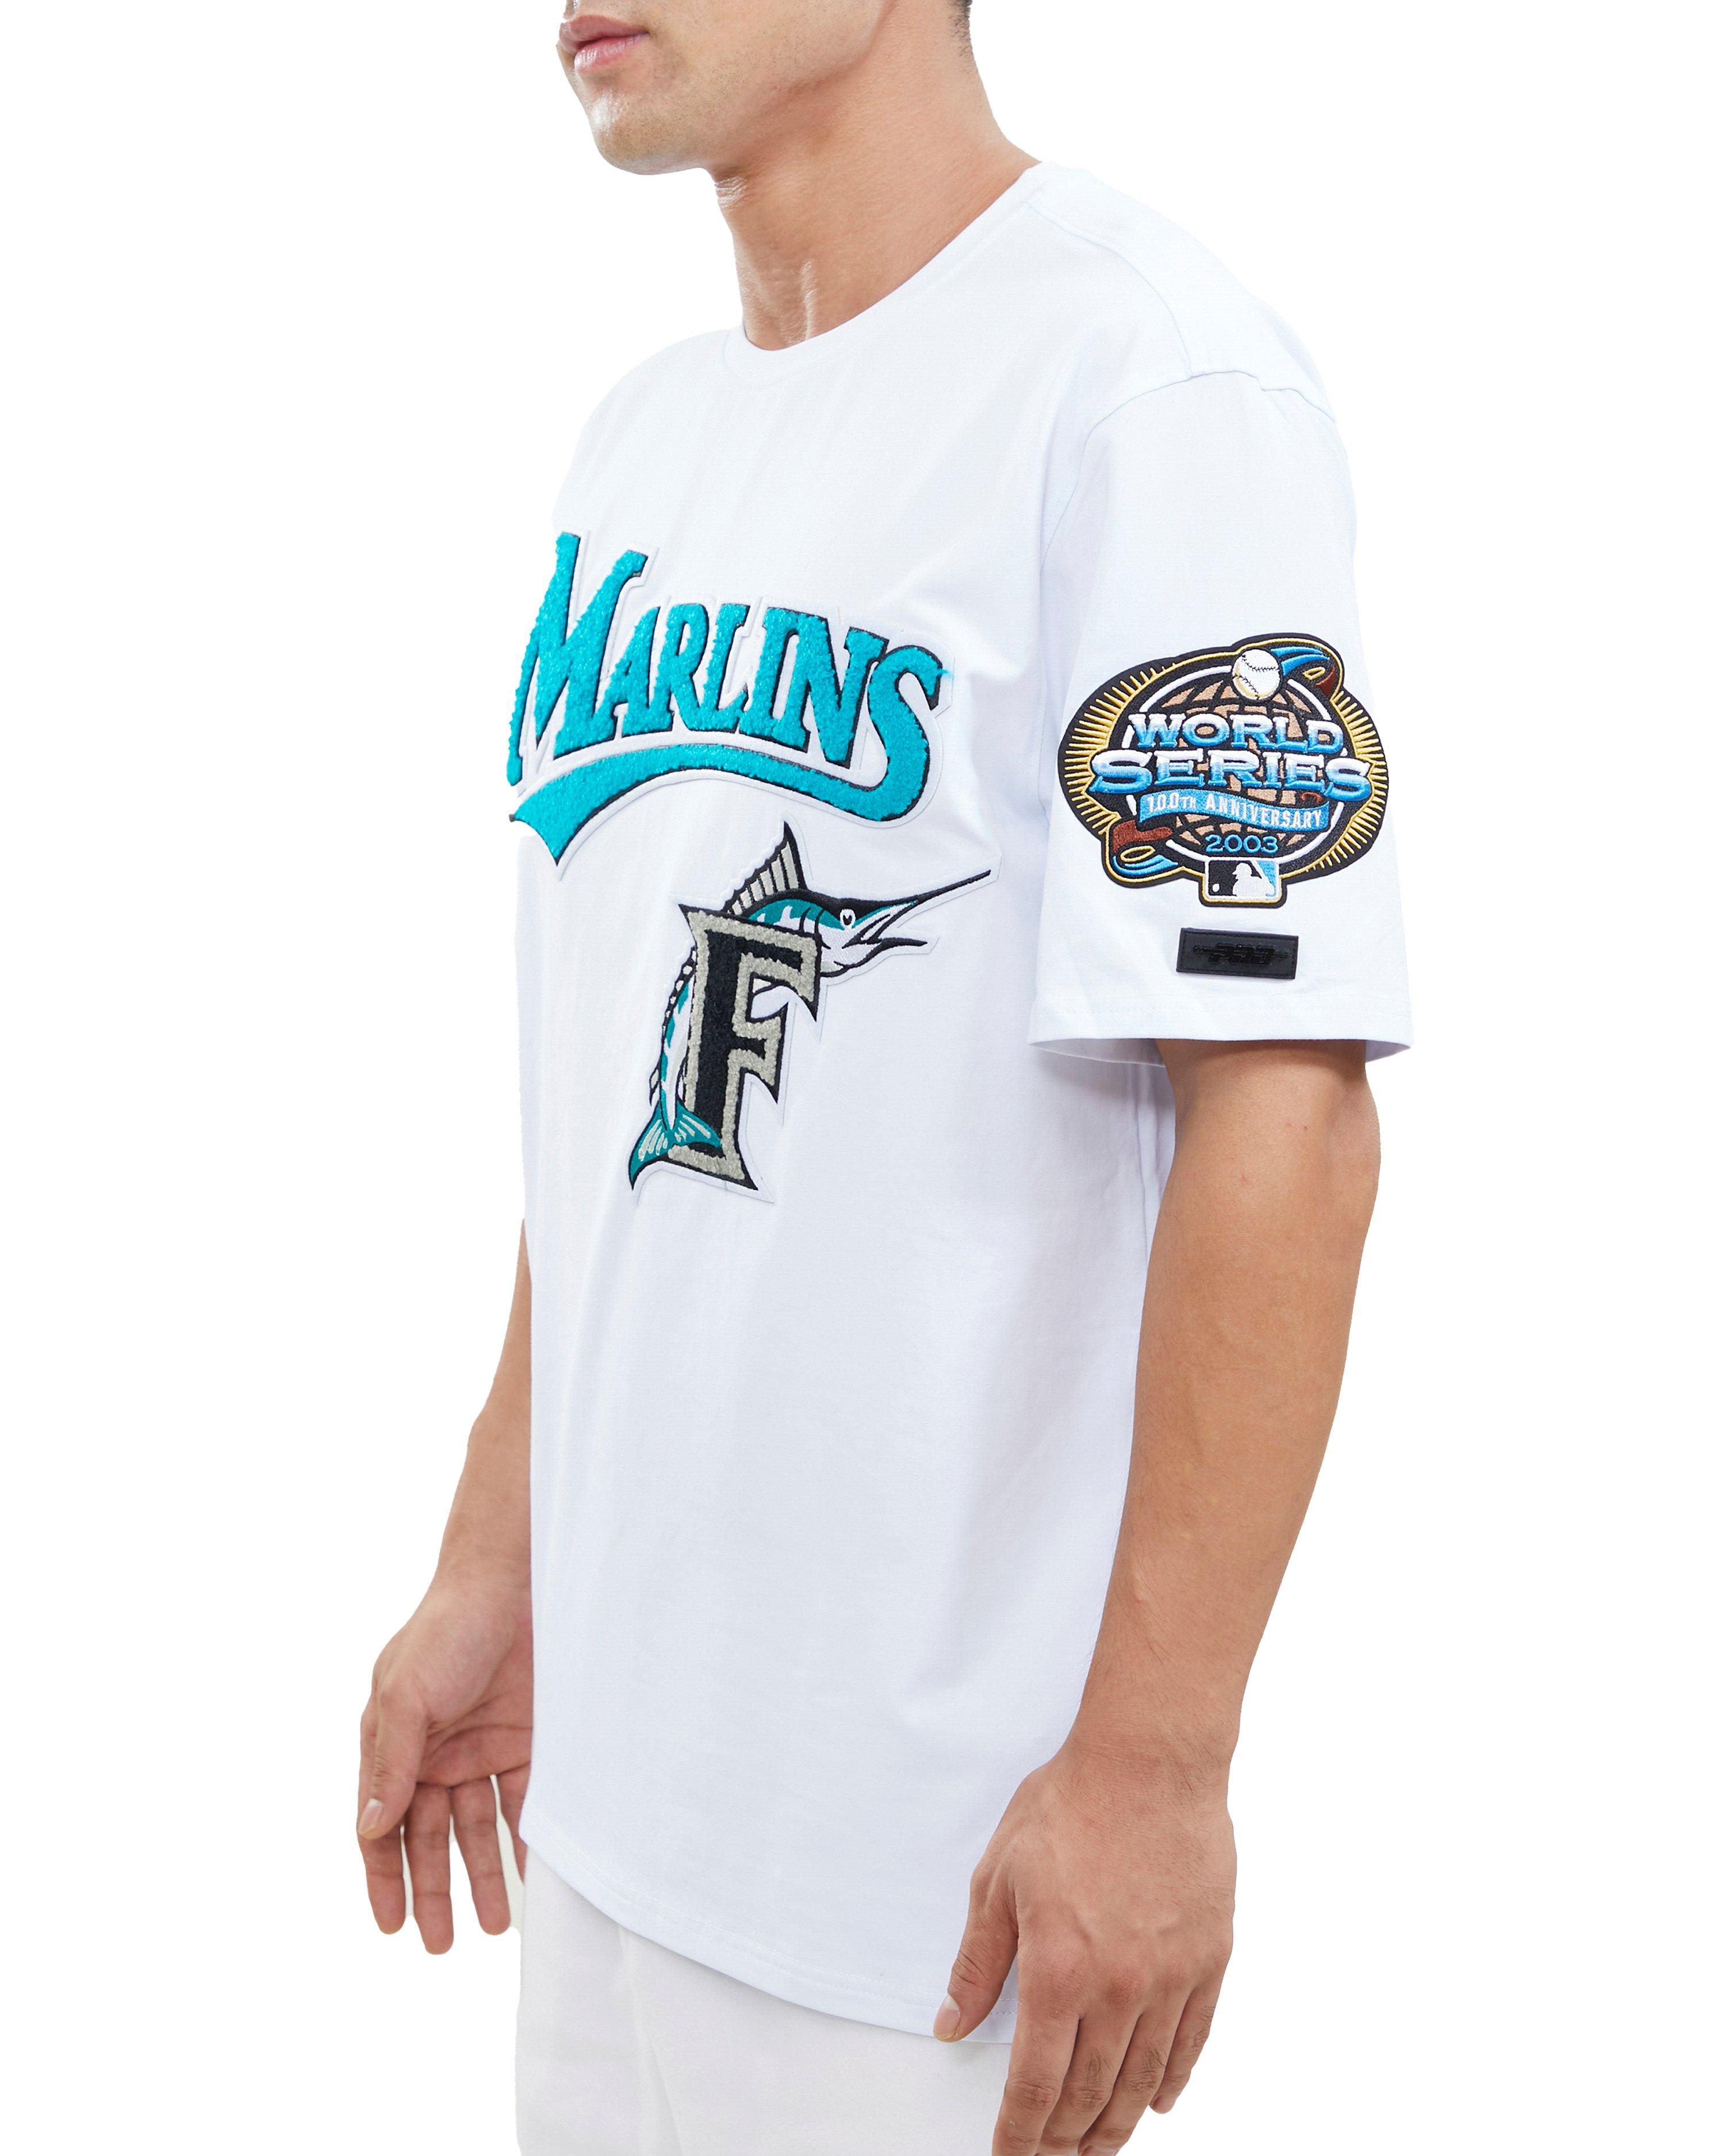 Pro Standard Miami Marlins Classic White Tracksuit - Pro Standard Florida  Marlins Retro SnapBack @marlins #luxury #athletic #elevated…